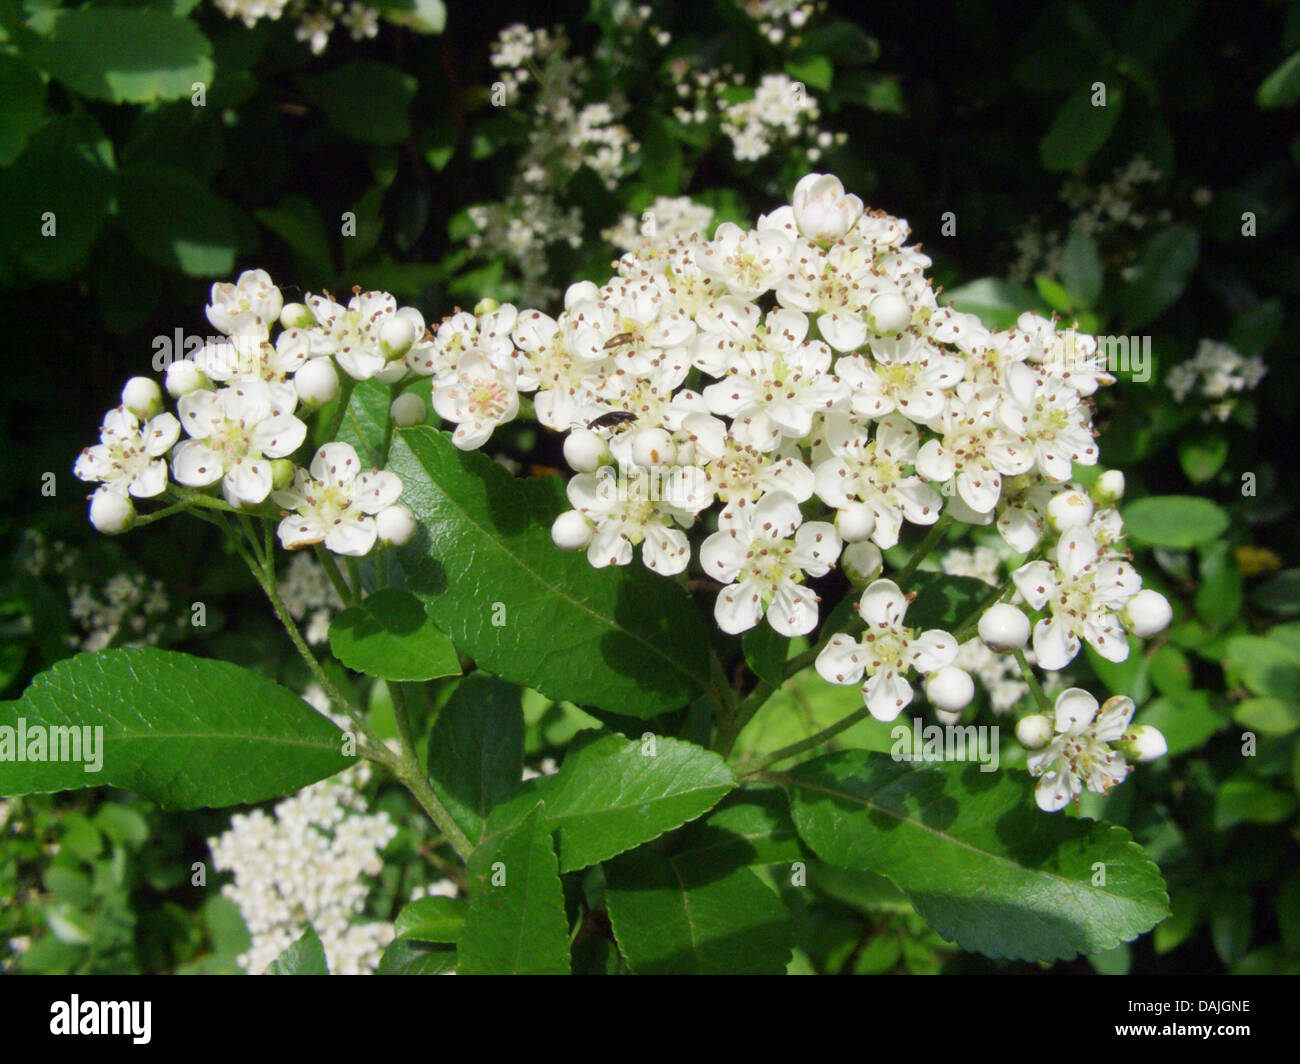 fire thorn, scarlet firethorn, burning bush (Pyracantha coccinea), blooming Stock Photo